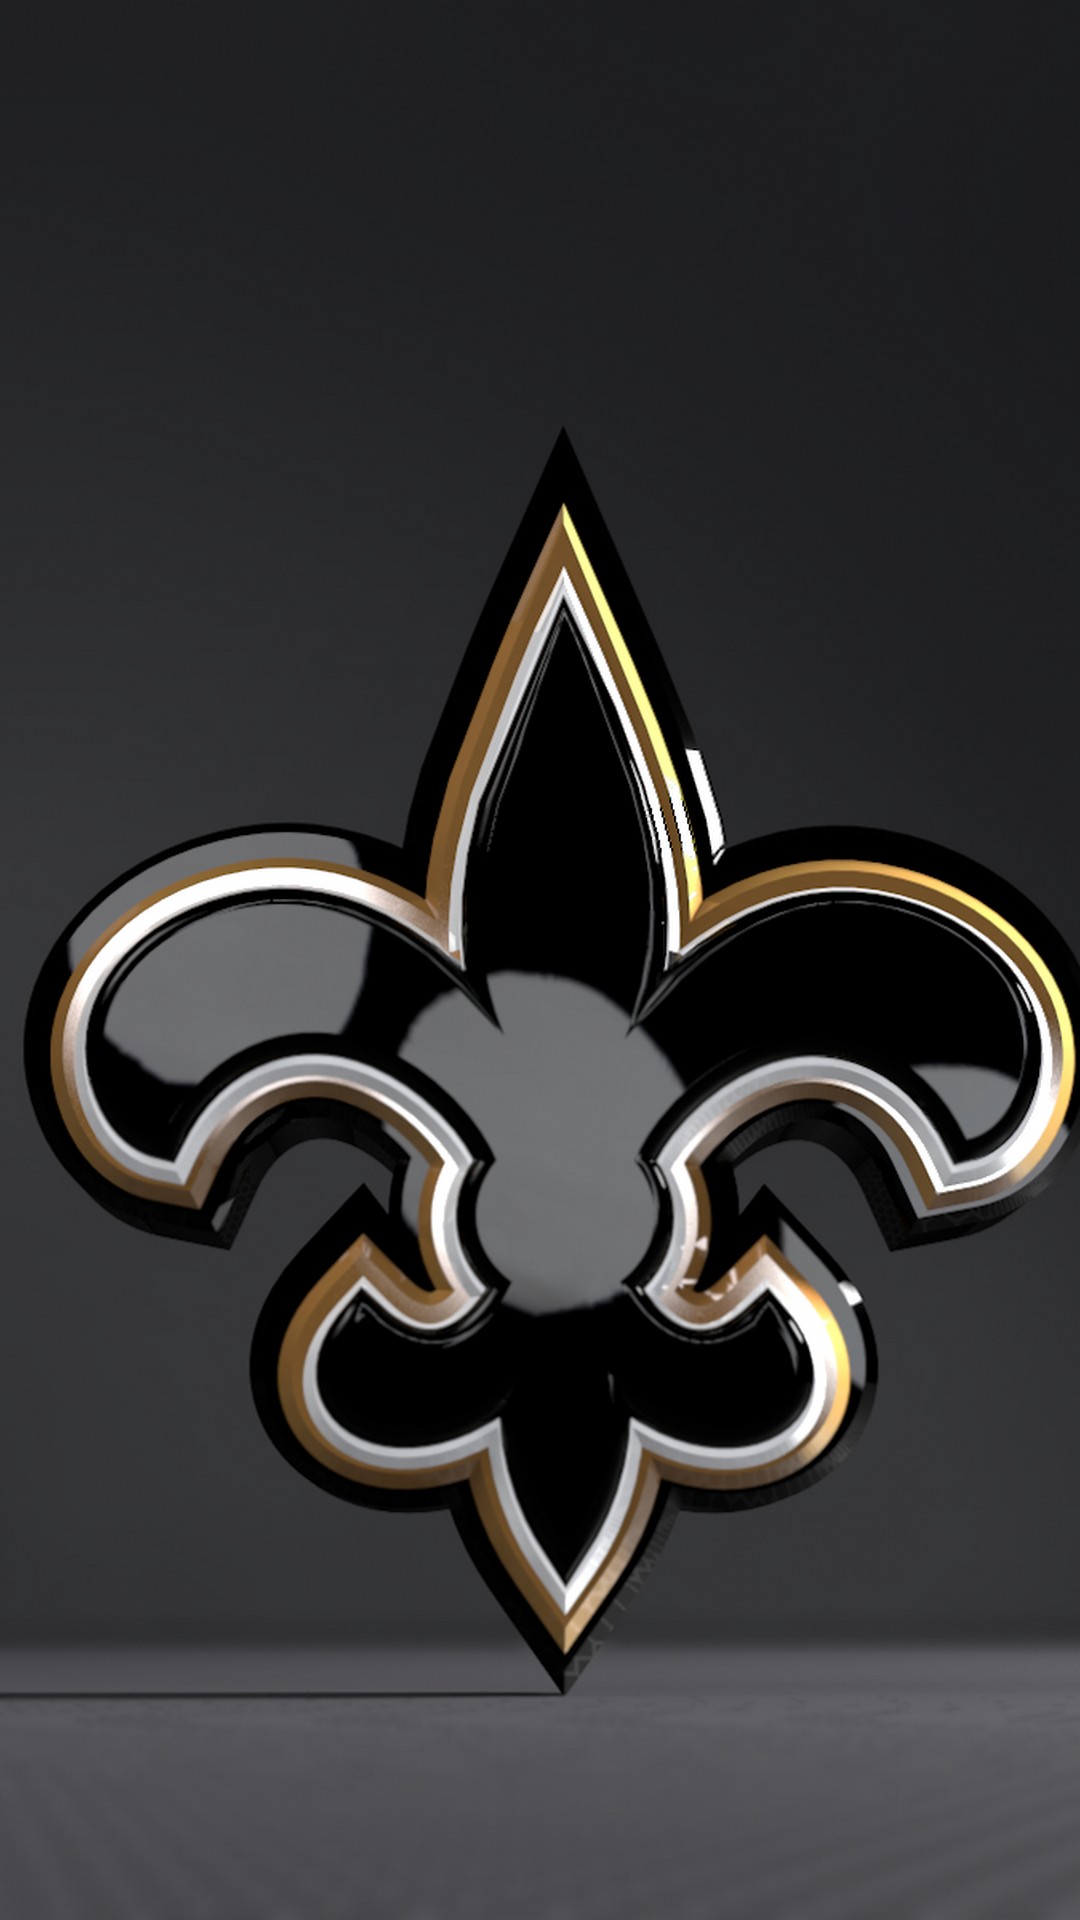 New Orleans Saints iPhone Wallpaper High Quality With high-resolution 1080X1920 pixel. Donwload and set as wallpaper for your iPhone X, iPhone XS home screen backgrounds, XS Max, XR, iPhone8 lock screen wallpaper, iPhone 7, 6, SE, and other mobile devices